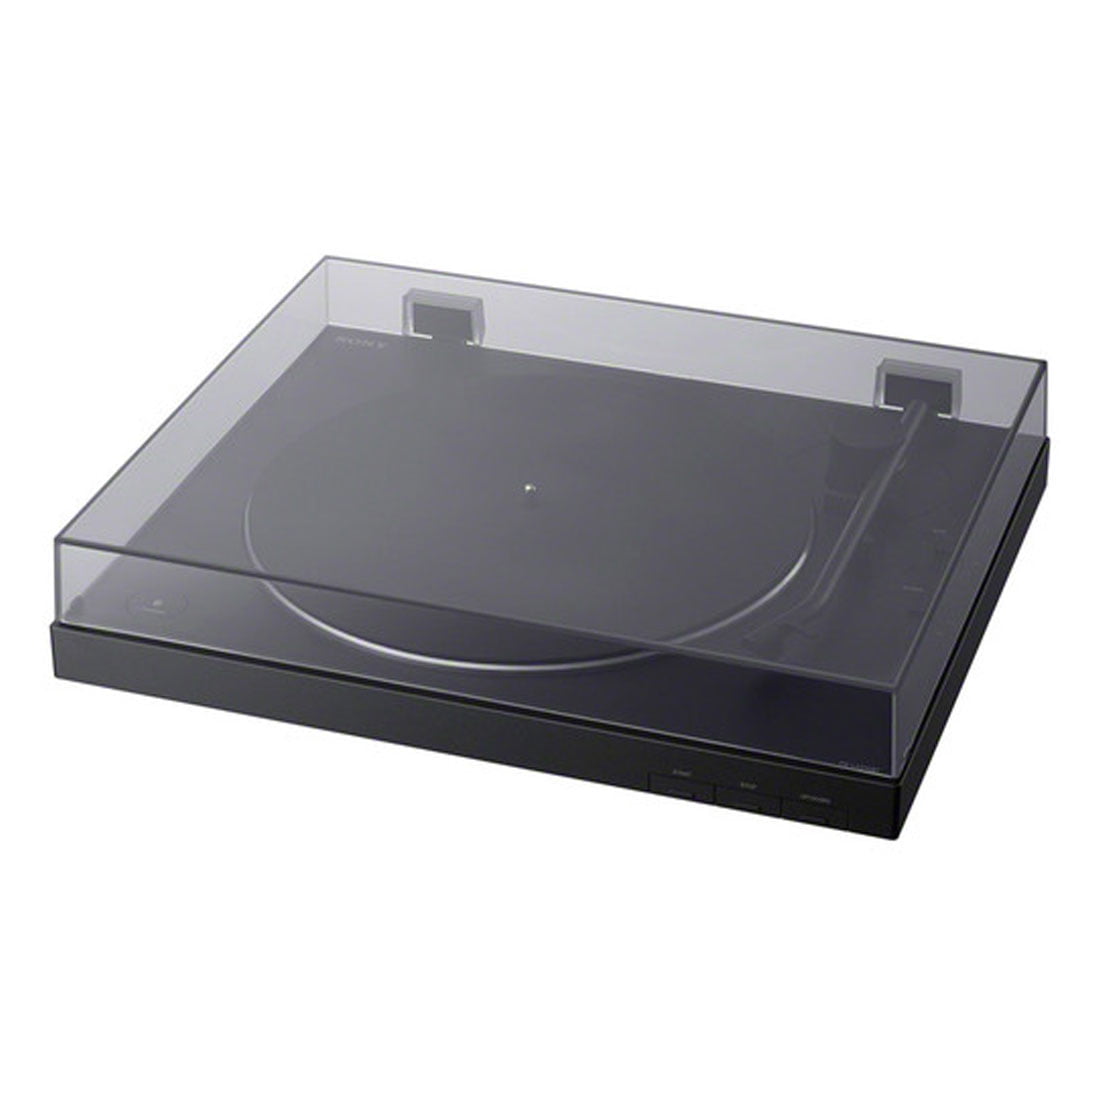 Sony PS-LX310BT USB Bluetooth Stereo Turntable